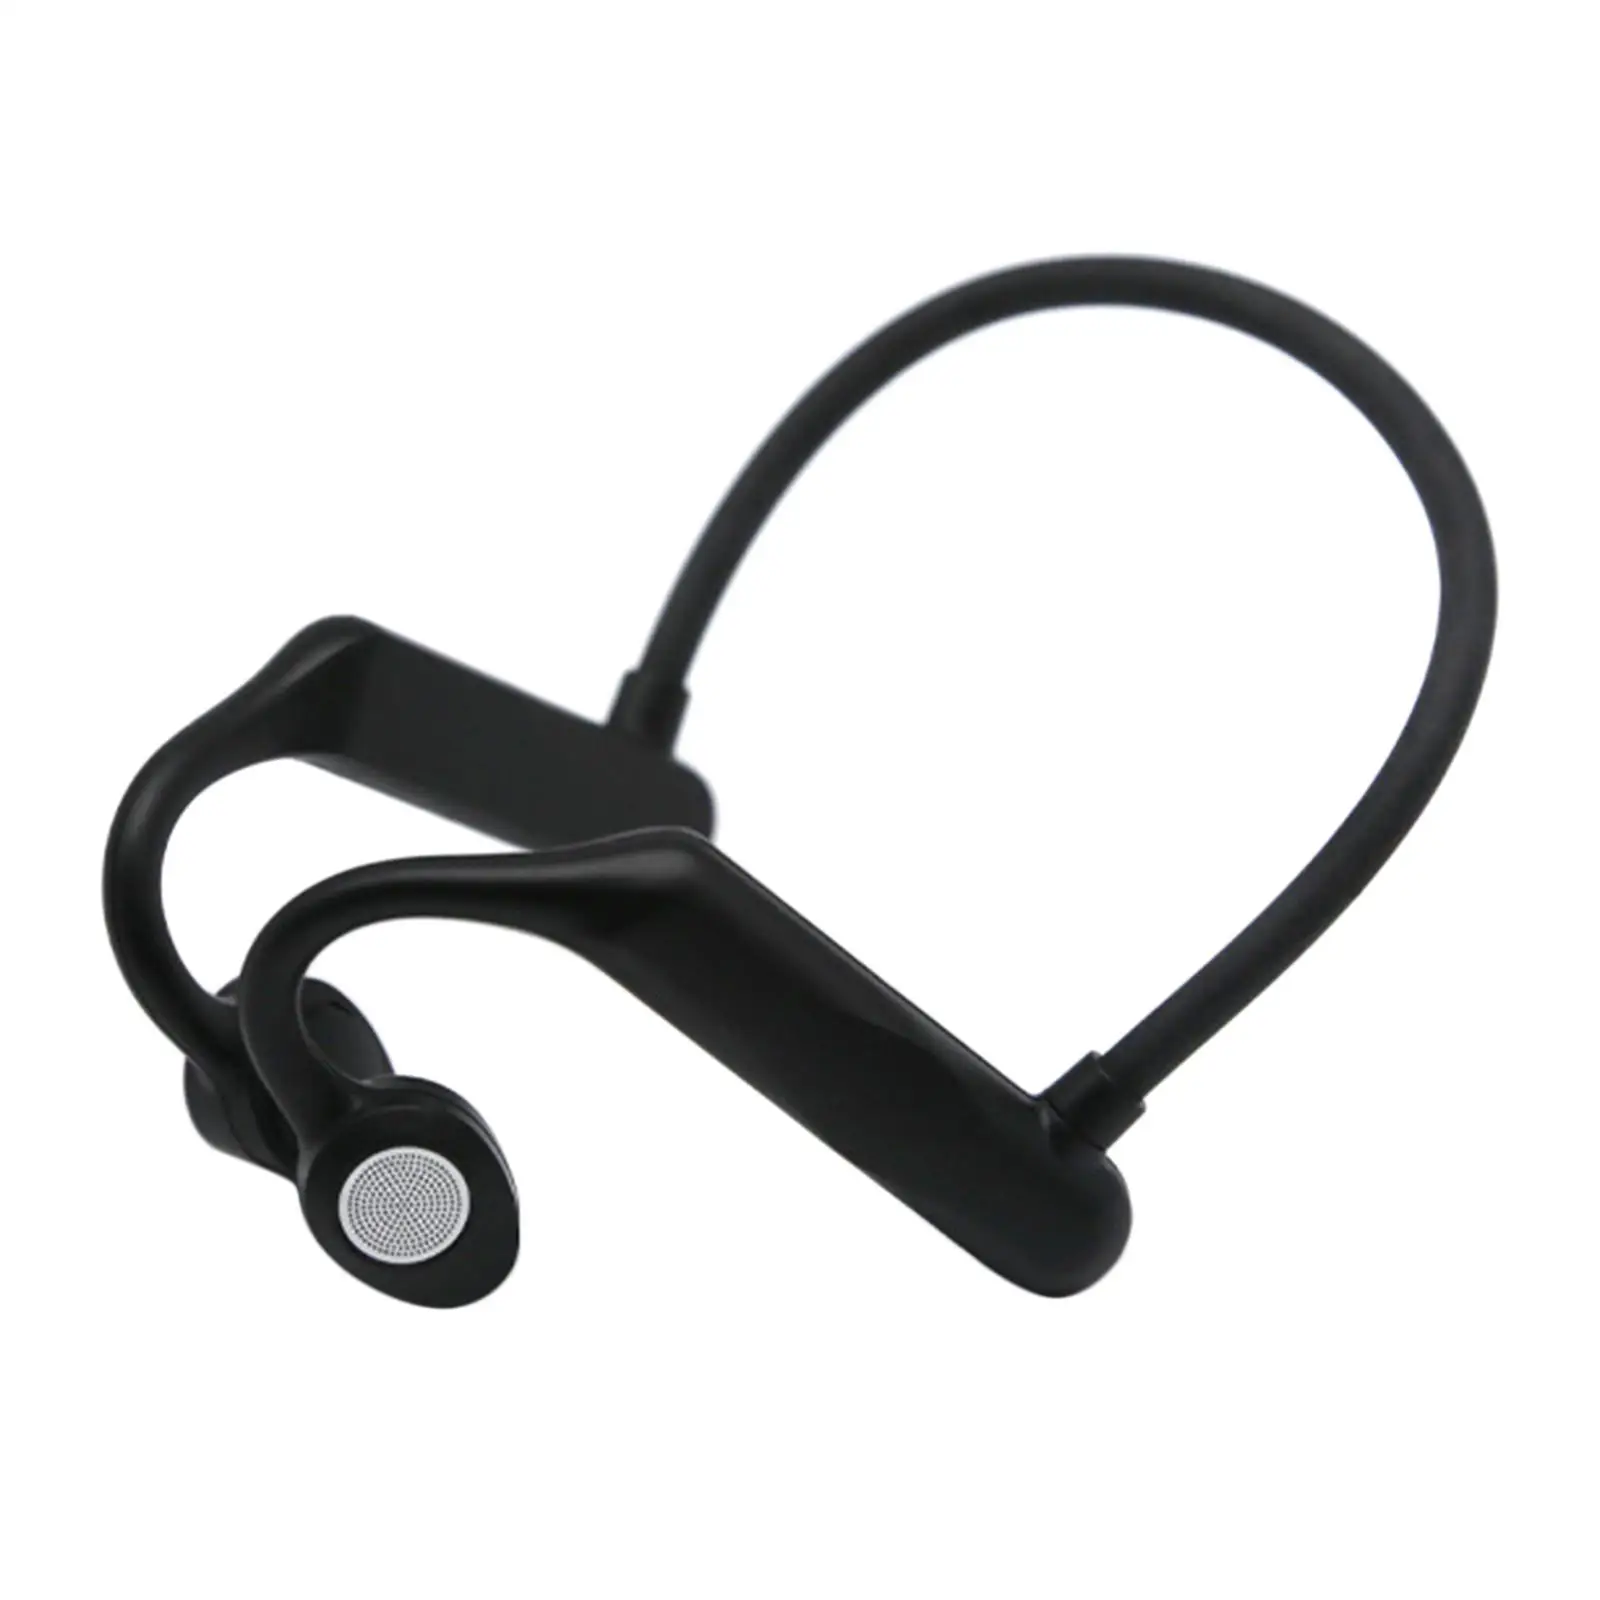 Upgraded Sports Headset Lightweight Handsfree Waterproof Neckband Stereo for Workouts Climbing Walking Cycling Sport